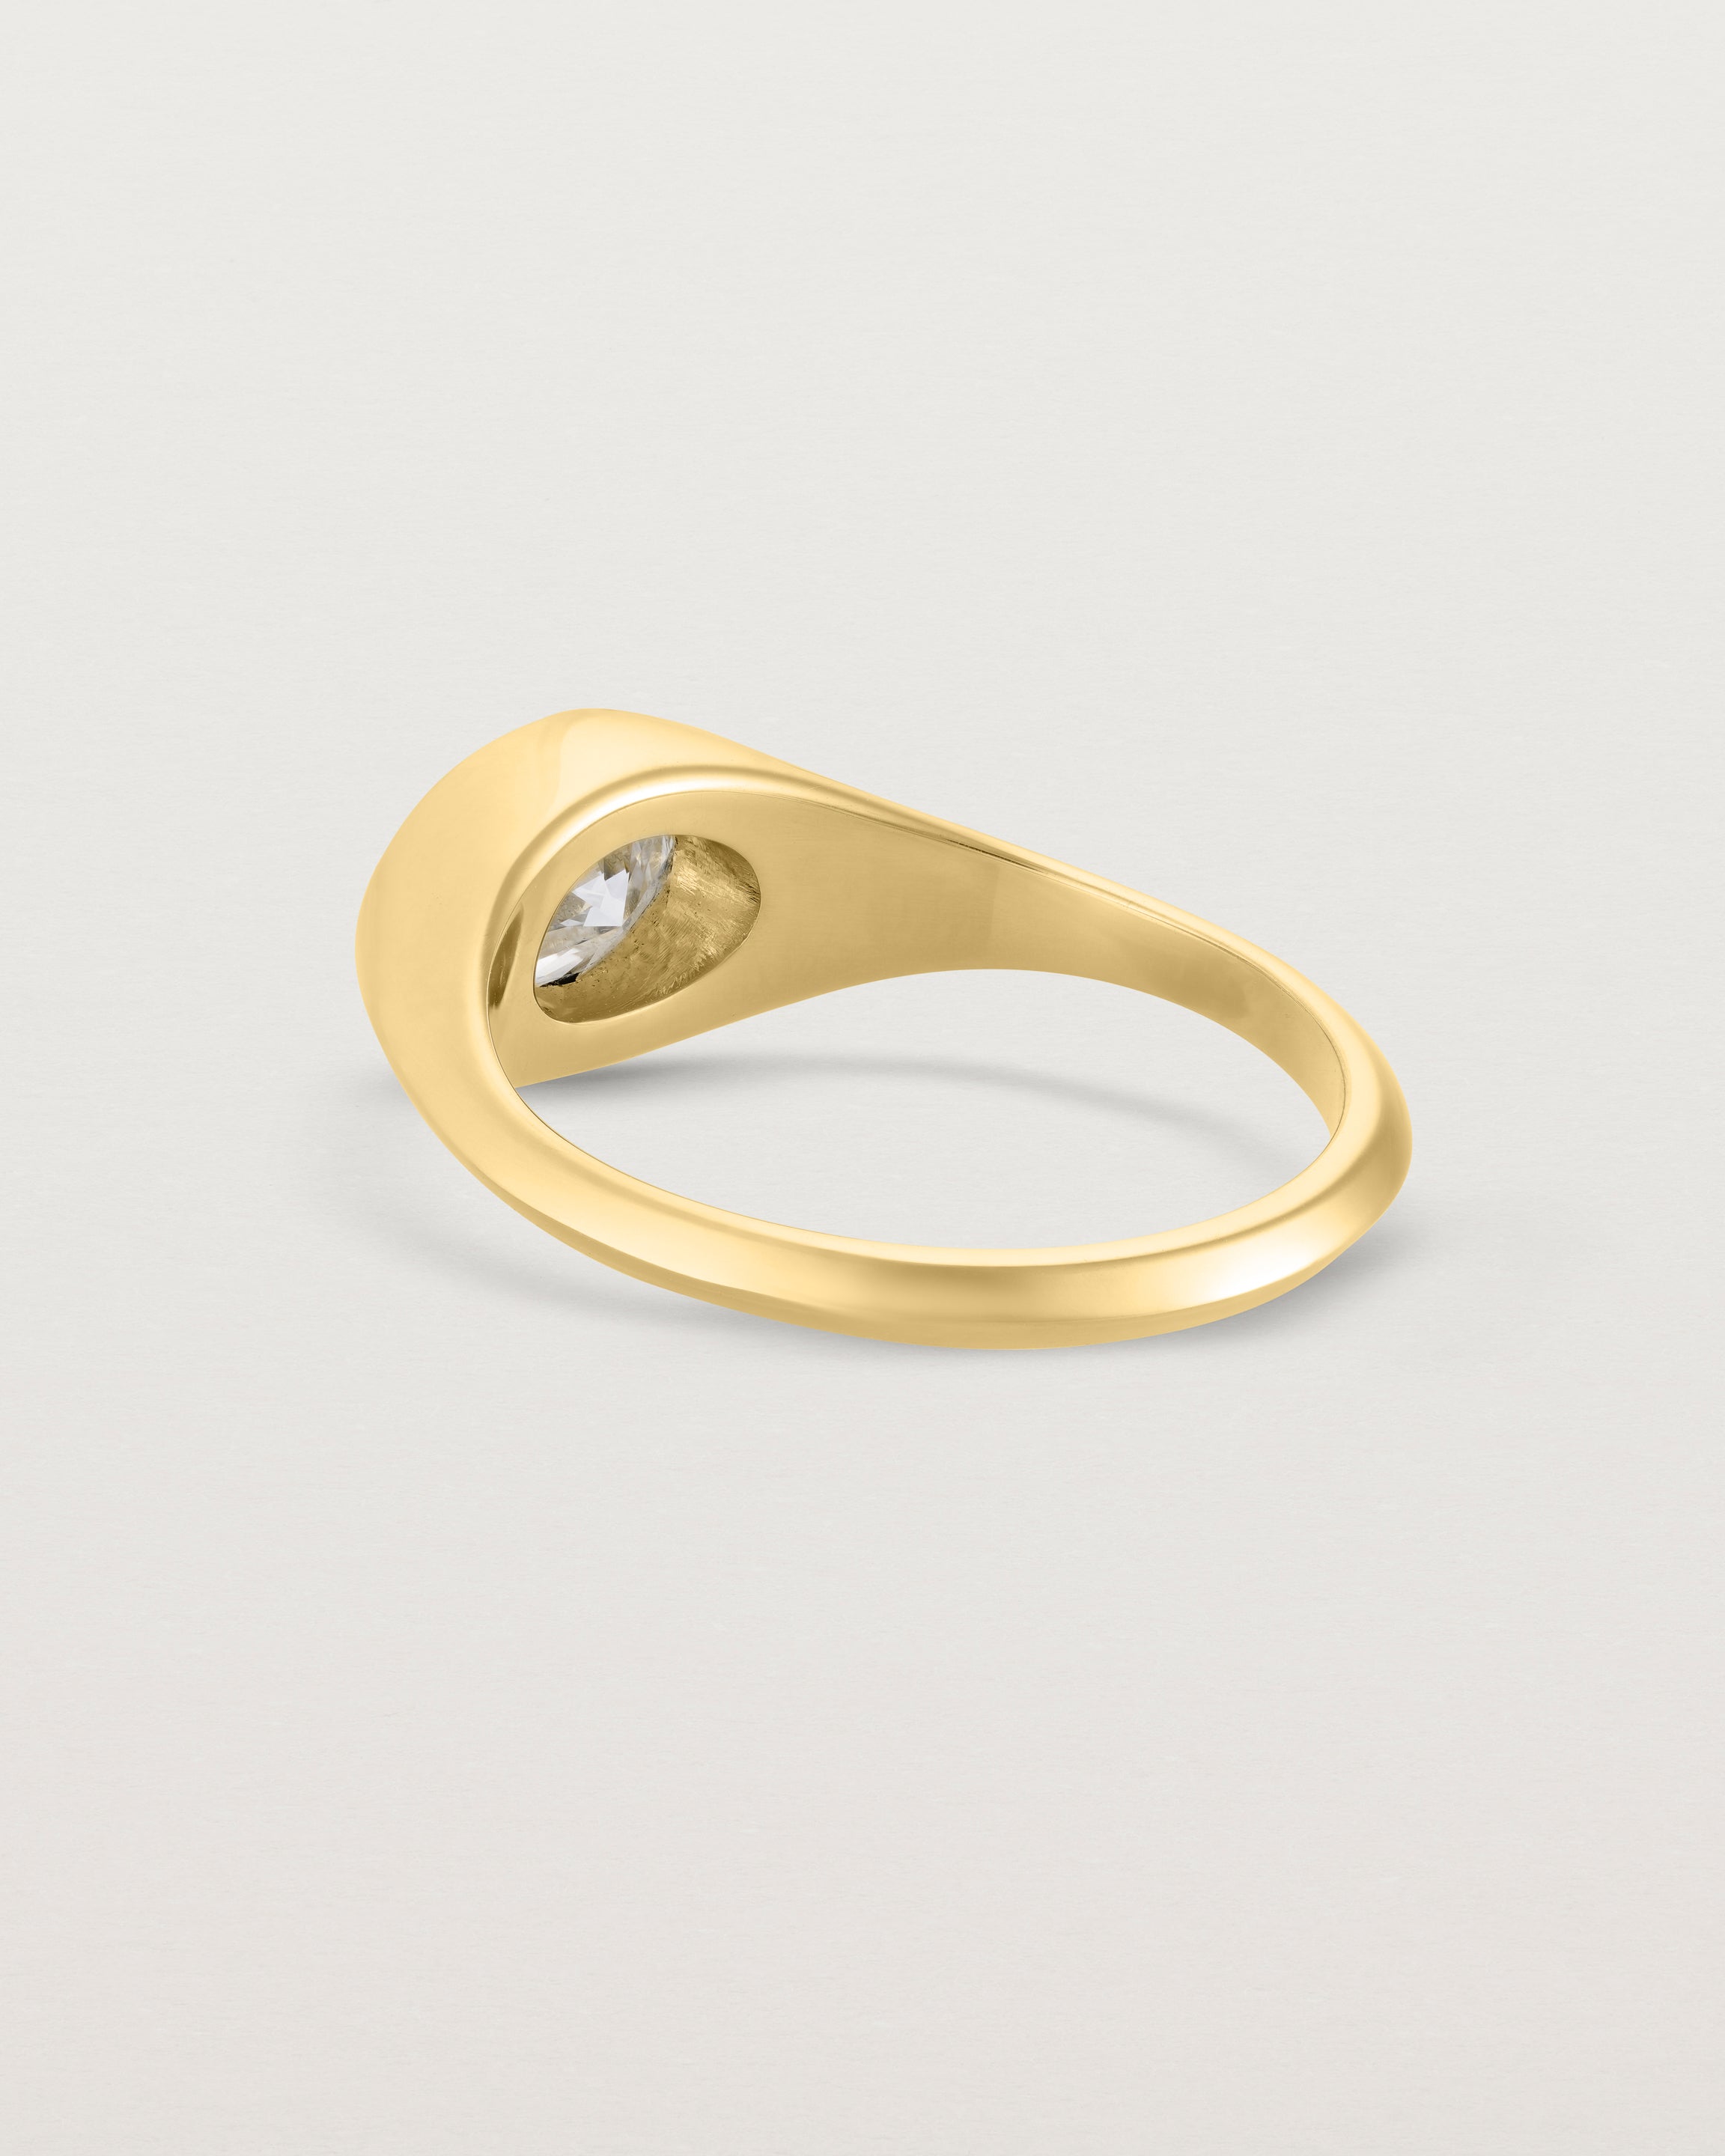 Back view of the Átlas Oval Signet | Laboratory Grown Diamond in yellow gold, with a polished finish.